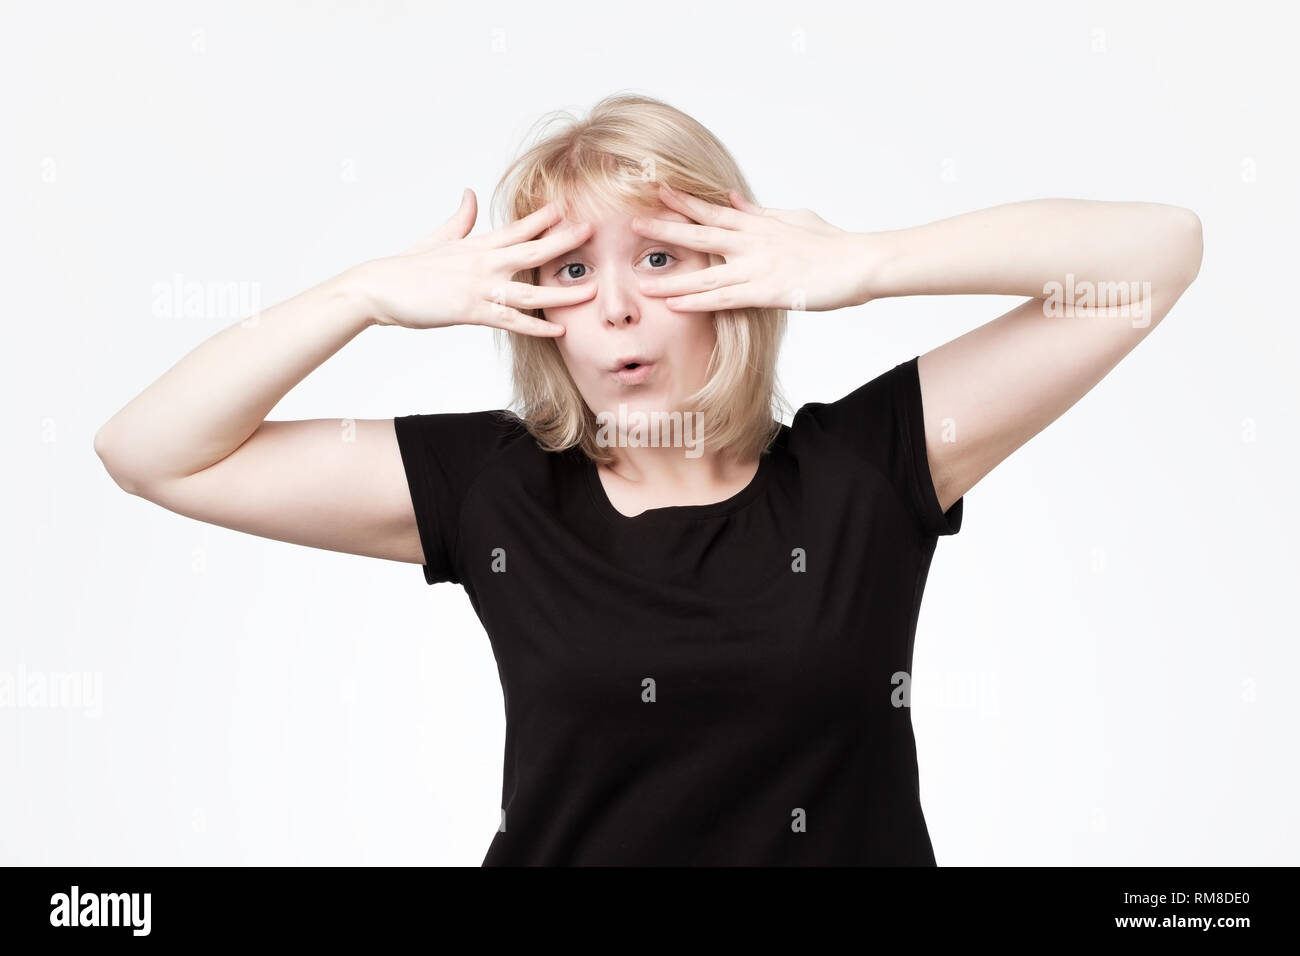 Shy timid teenage girl covering face with hands and peeping through her fingers at camera. Stock Photo